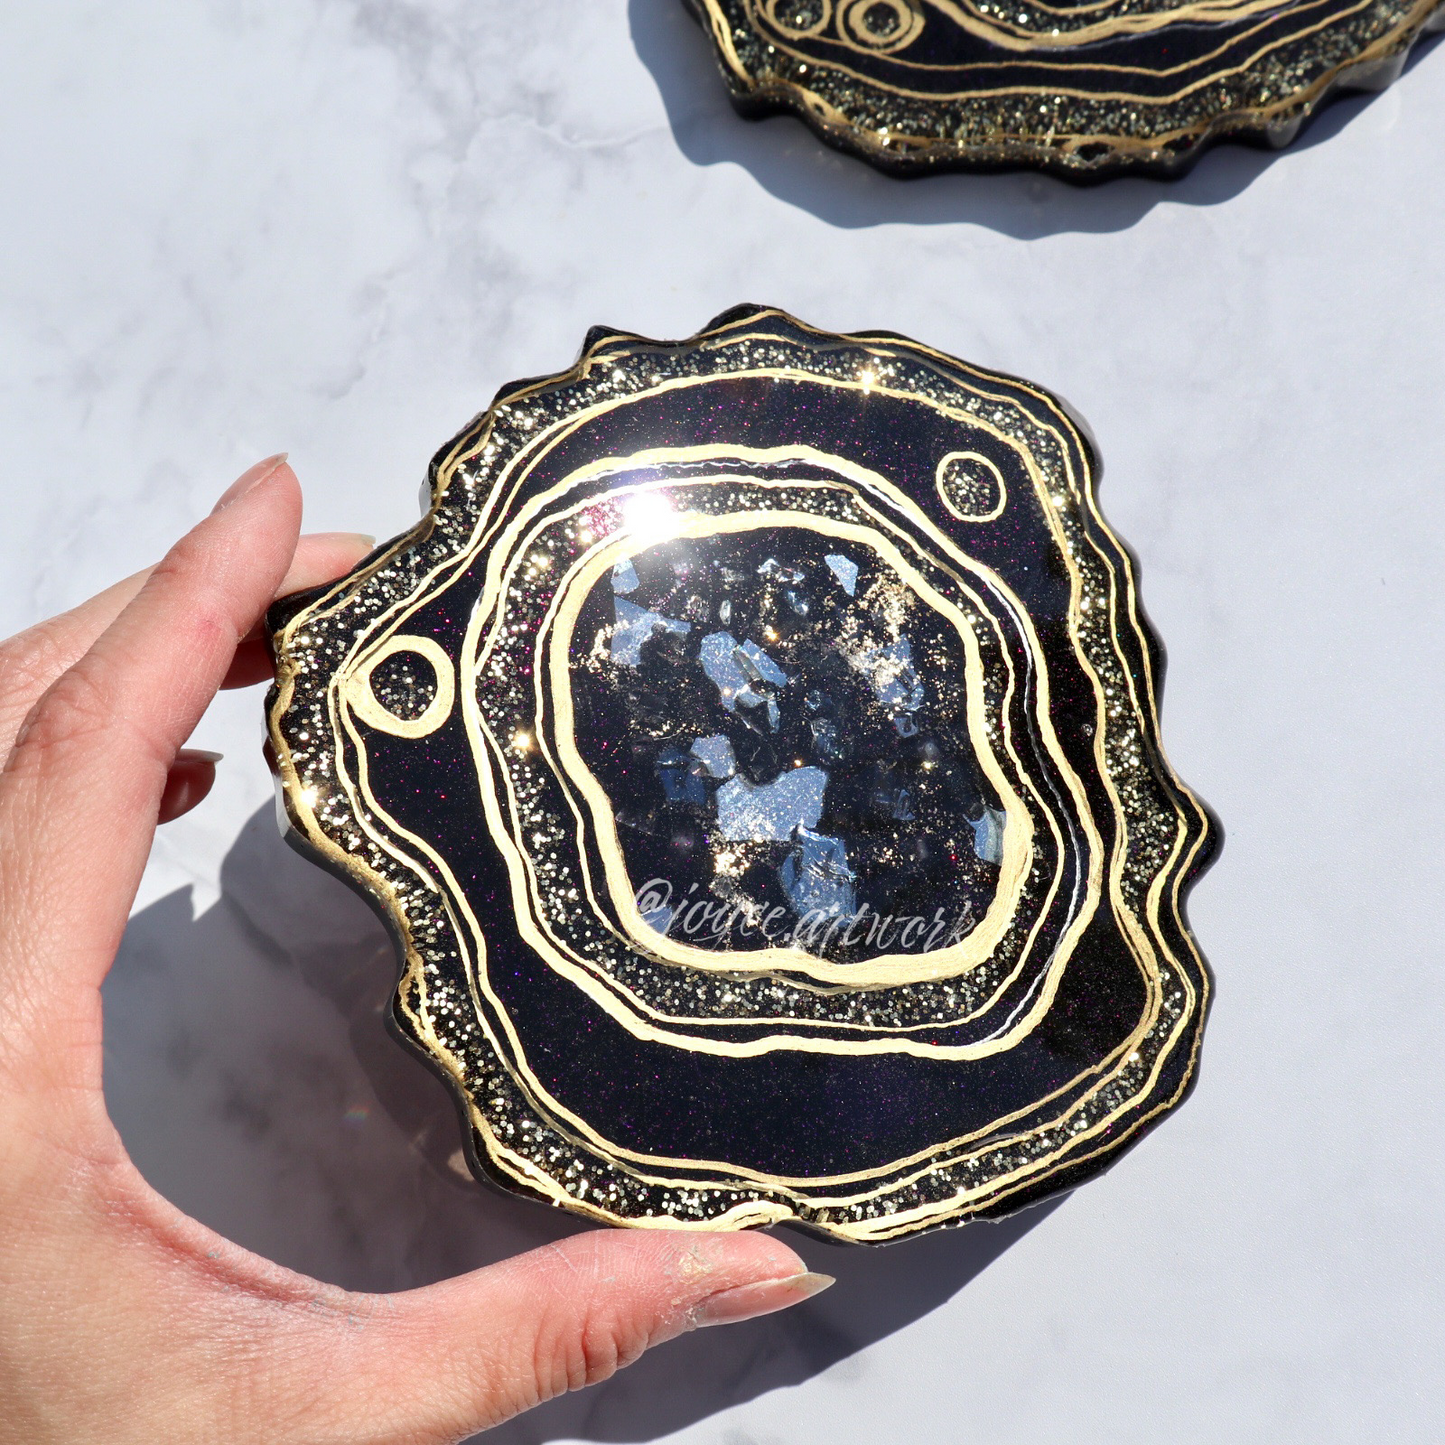 Black and Gold Geode Coasters